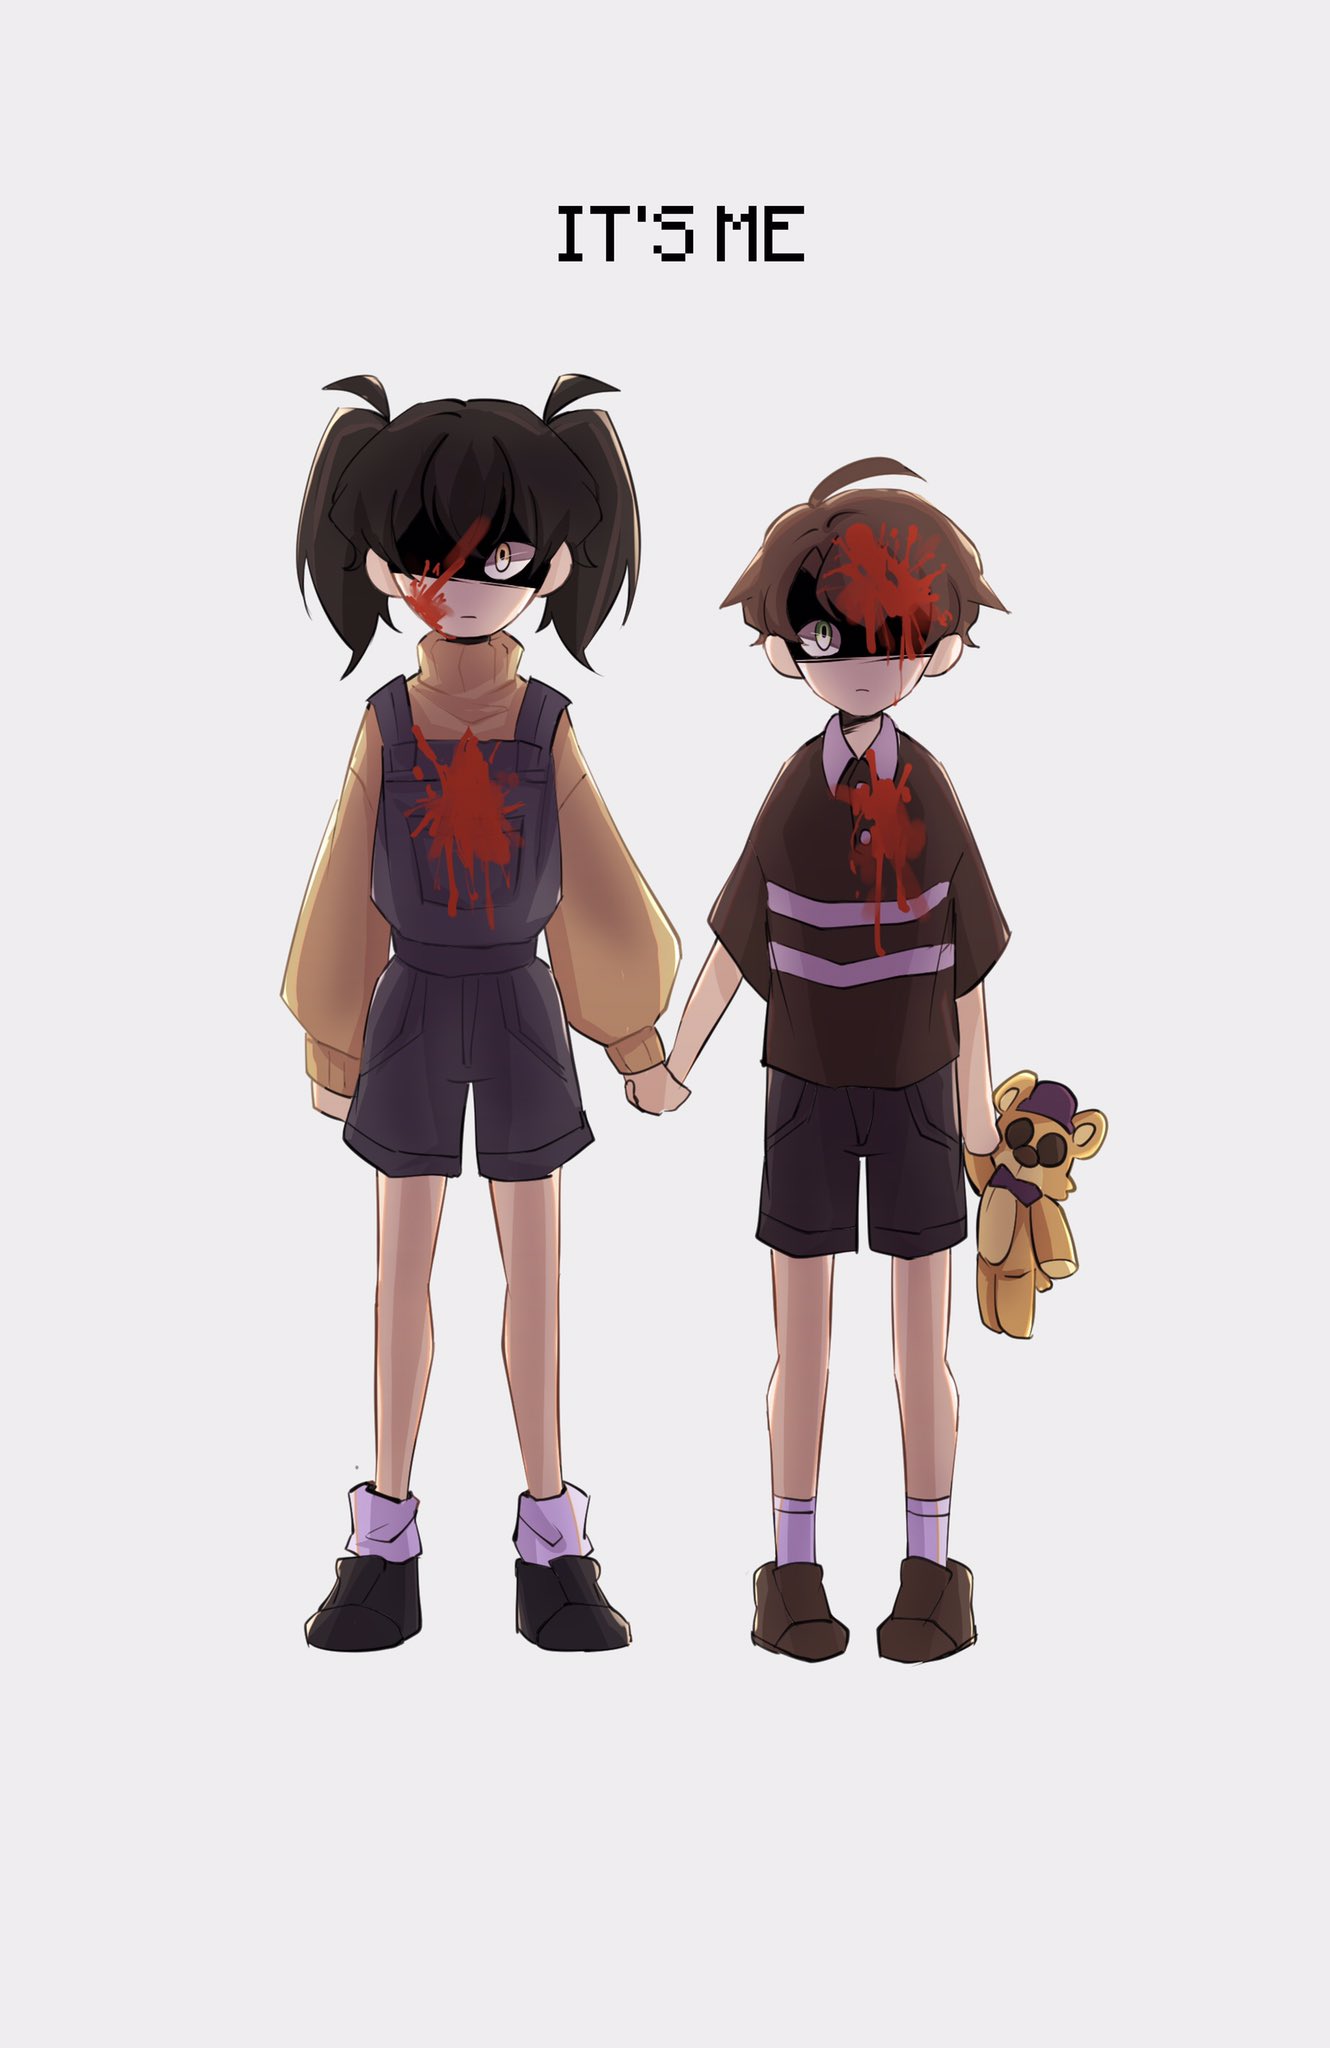 1boy 1girl black_hair blood blood_on_face blue_shorts brown_hair cassidy_(fnaf) crying_child_(fnaf) five_nights_at_freddy's highres holding holding_hands holding_stuffed_toy medium_hair shirt short_hair shorts striped striped_shirt stuffed_animal stuffed_toy suspender_shorts suspenders sweater teddy_bear turtleneck twintails yellow_sweater